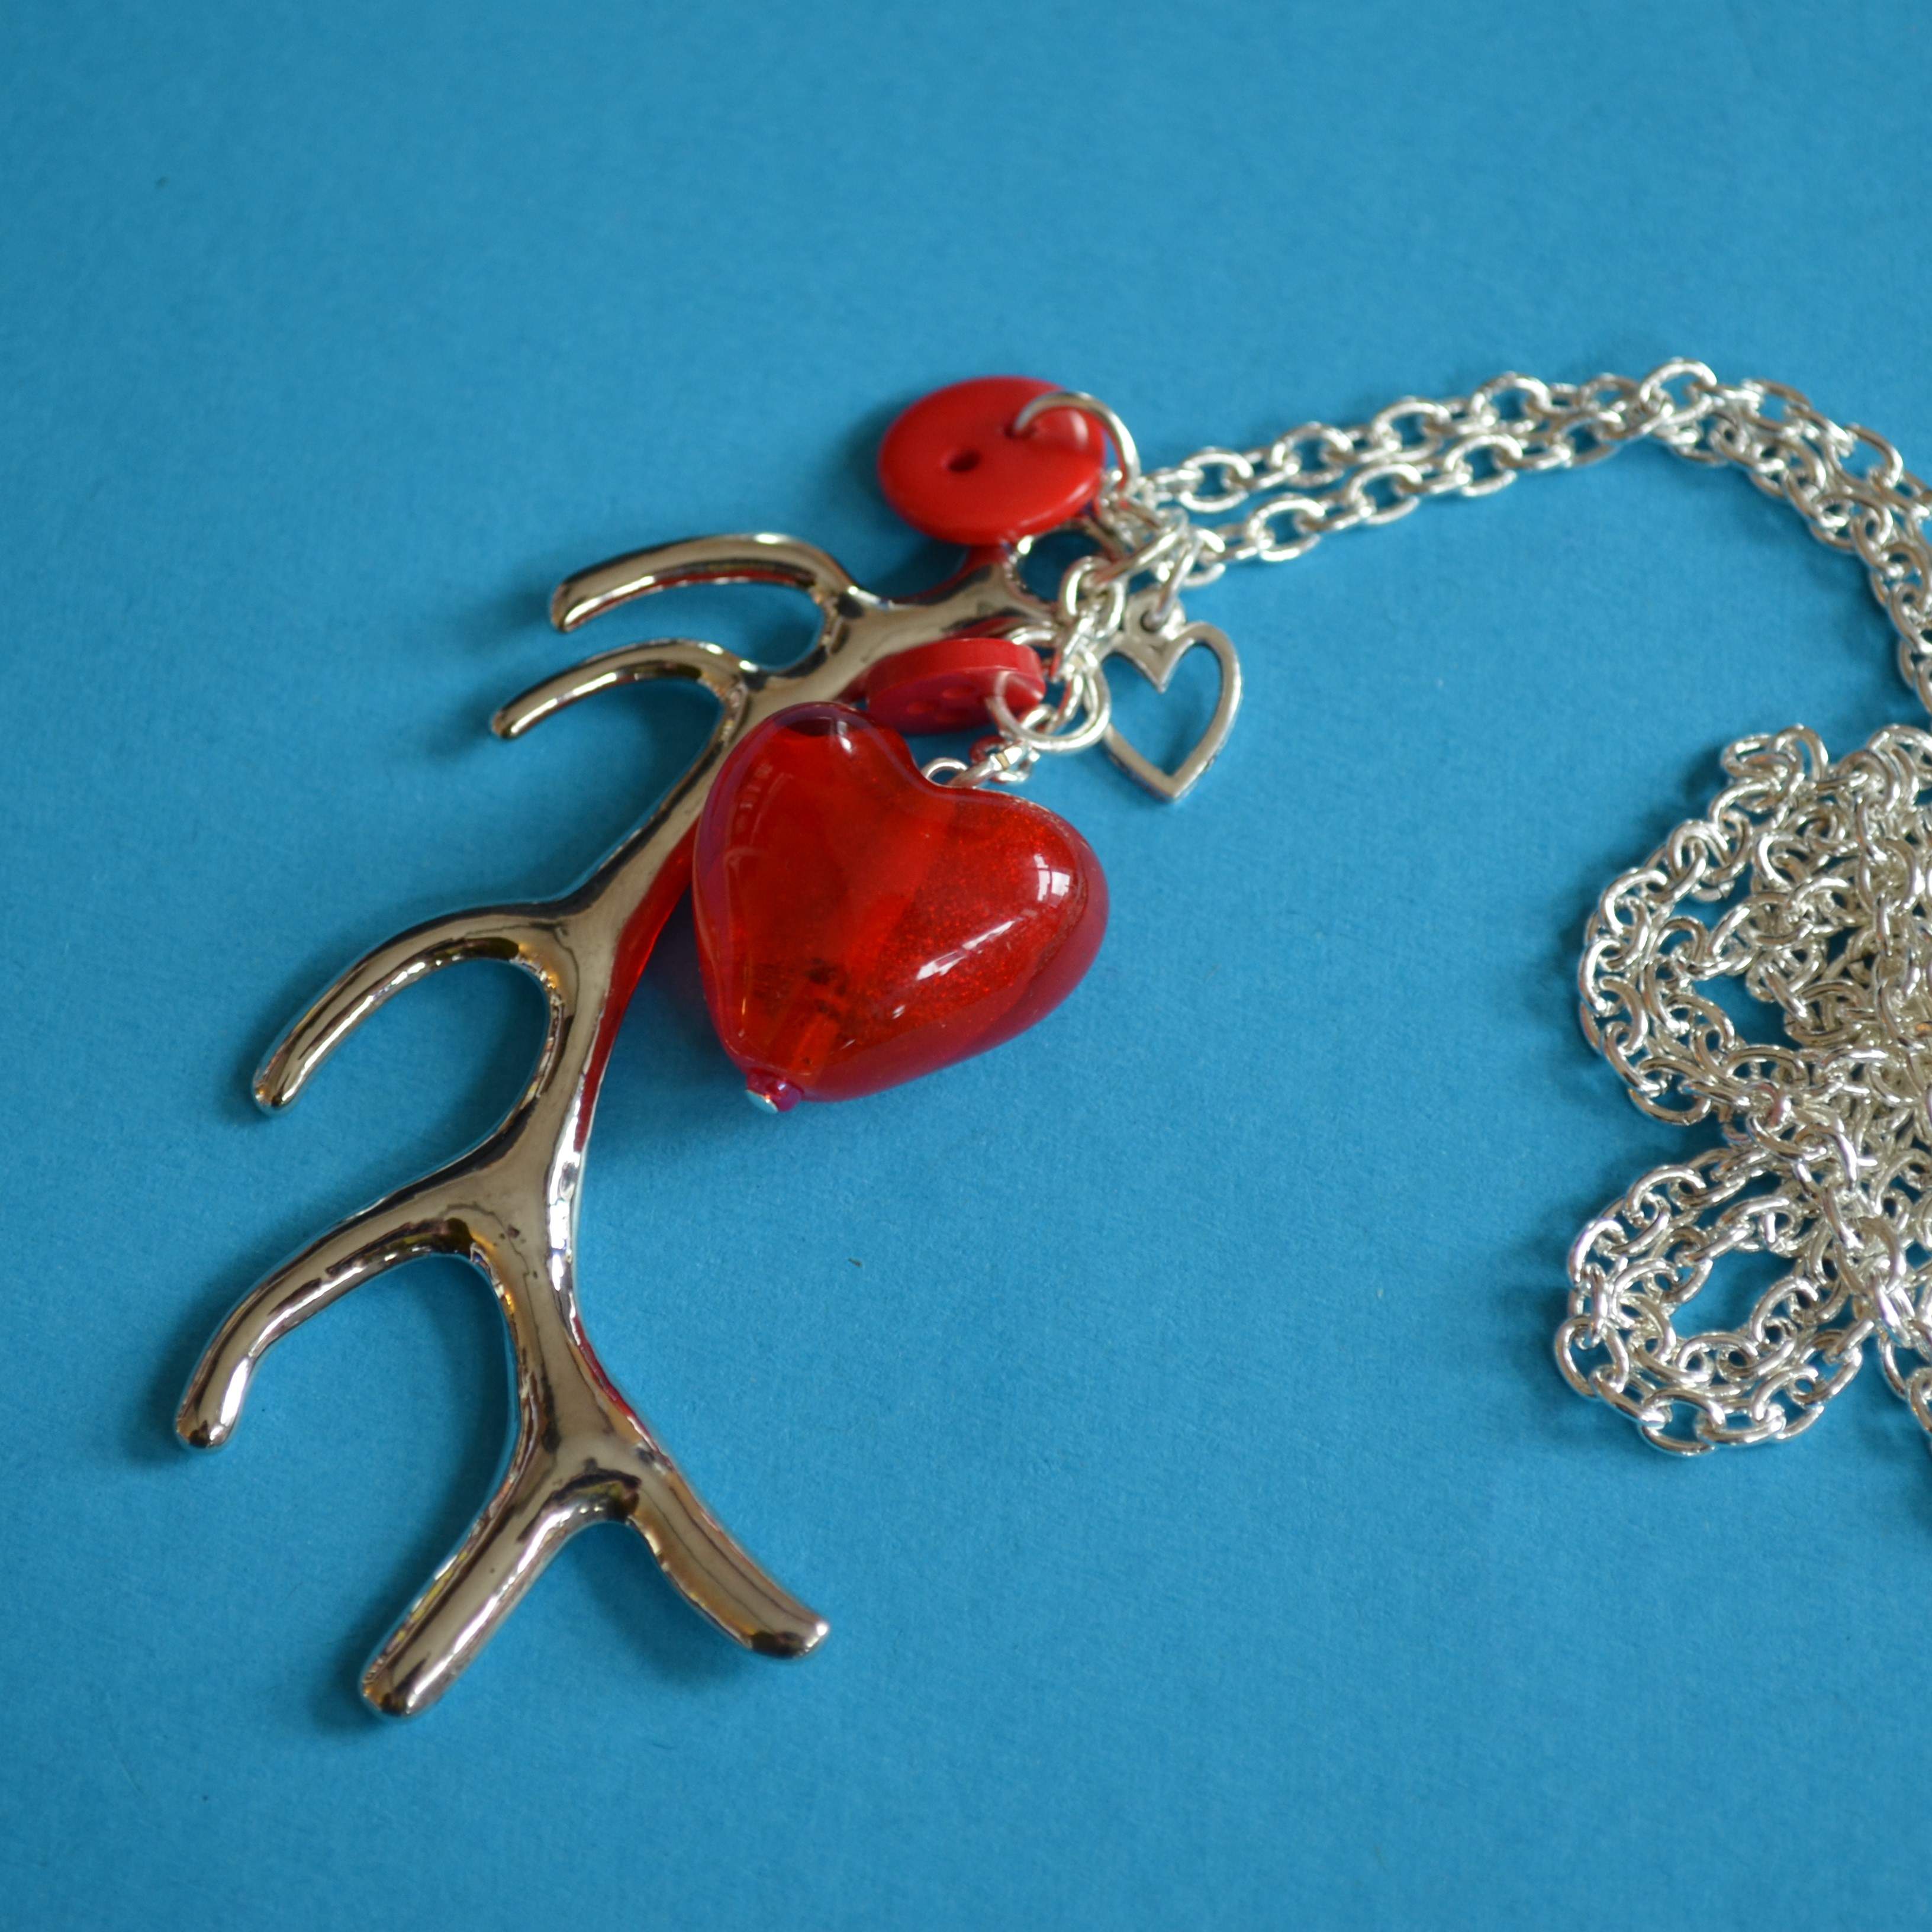 Red Long Antler Necklace